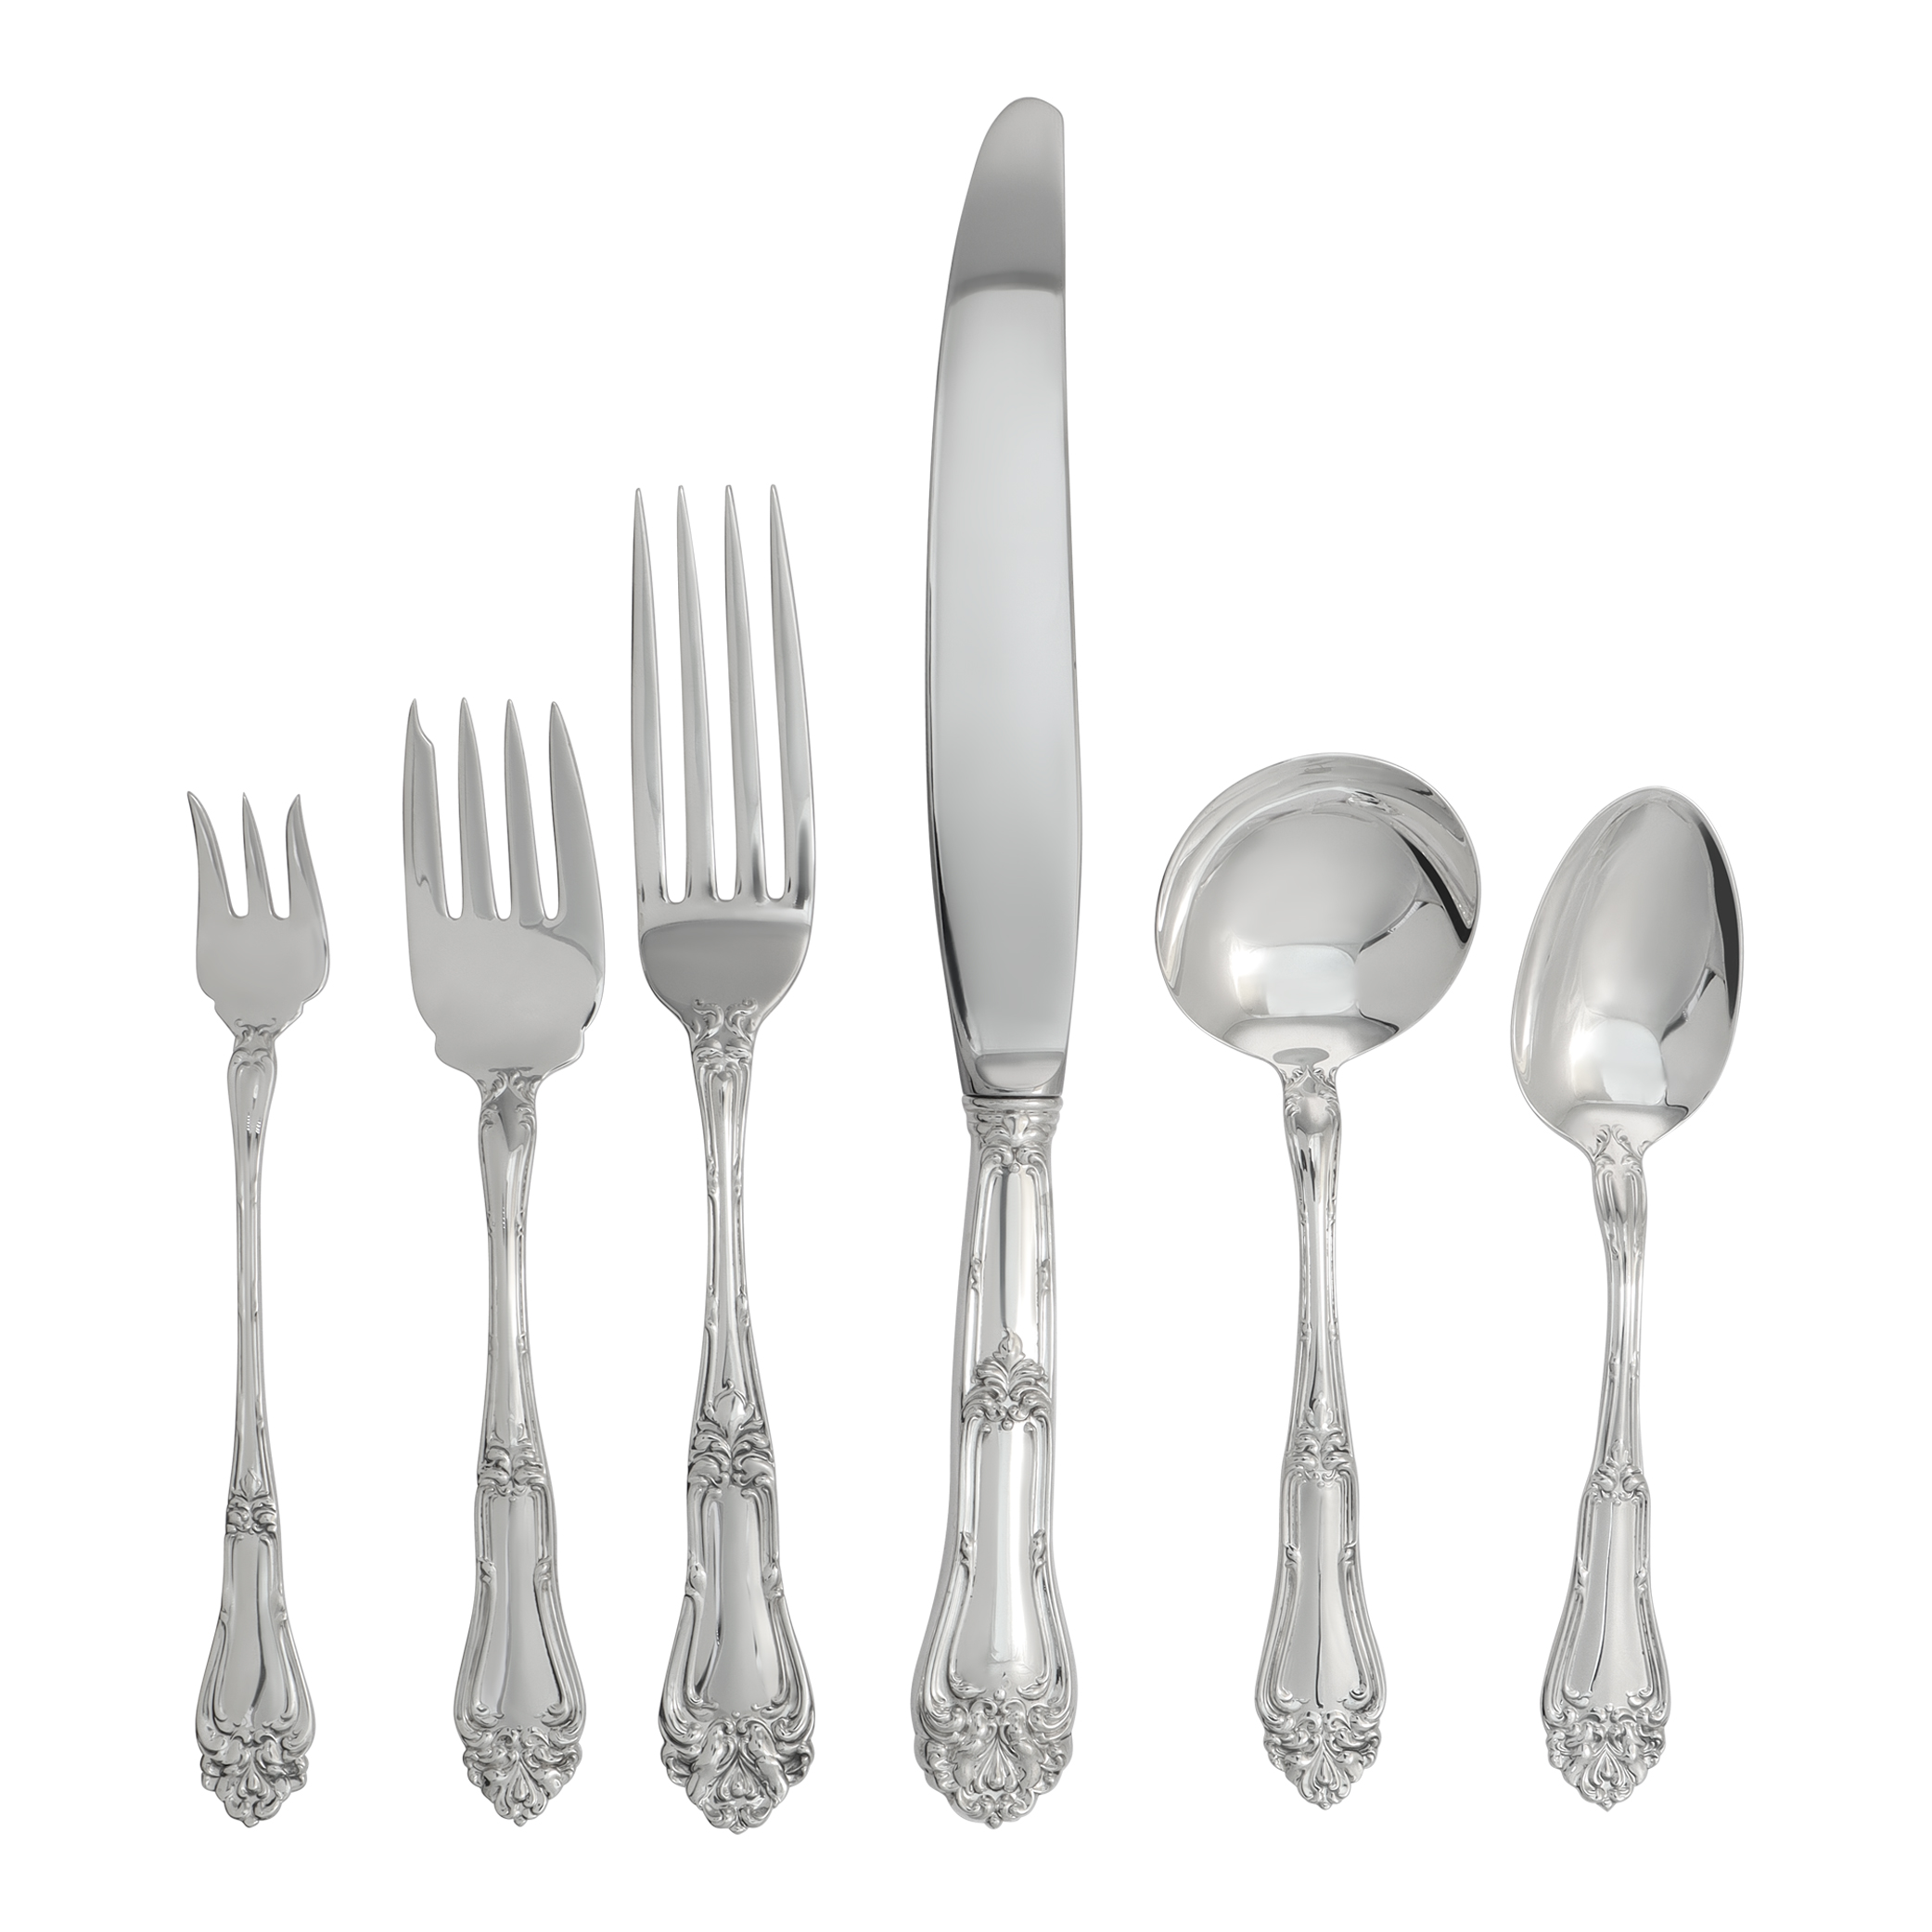 Champlain Aka Princess Carlotta Silver Flatware Set Patented In 1915 By Amston Silver Co & Arthur Stuart (Frank M. Whiting). Total 89 Pieces. 6 Place Setting By 12 (Double Tea Spoon) And 6 Serving Pieces, (Default)